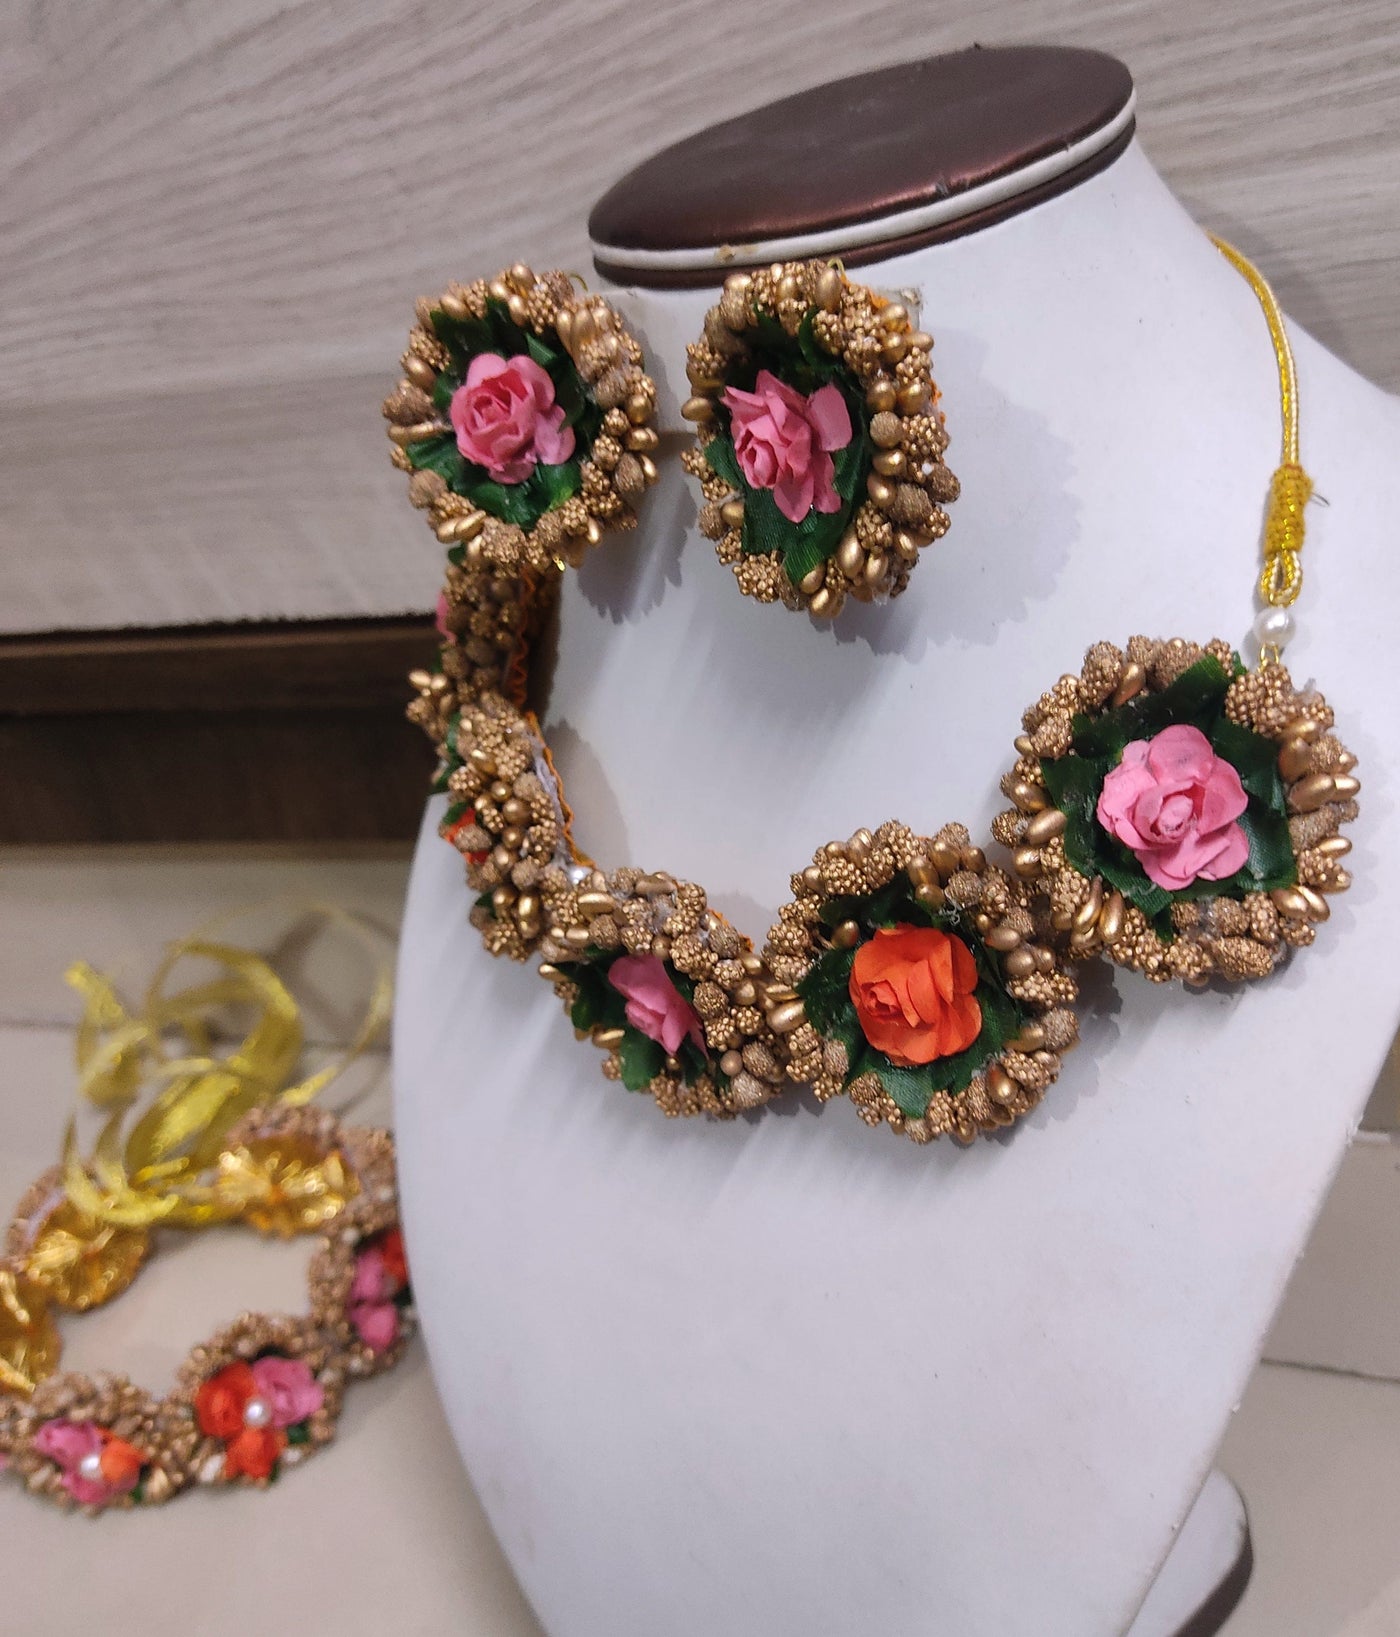 Lamansh latest jewellery LAMANSH® Artificial Flower 🌺 Jewellery set with matching Anklets & Hair Band / Floral Jewelry set for Haldi Mehendi ceremomy